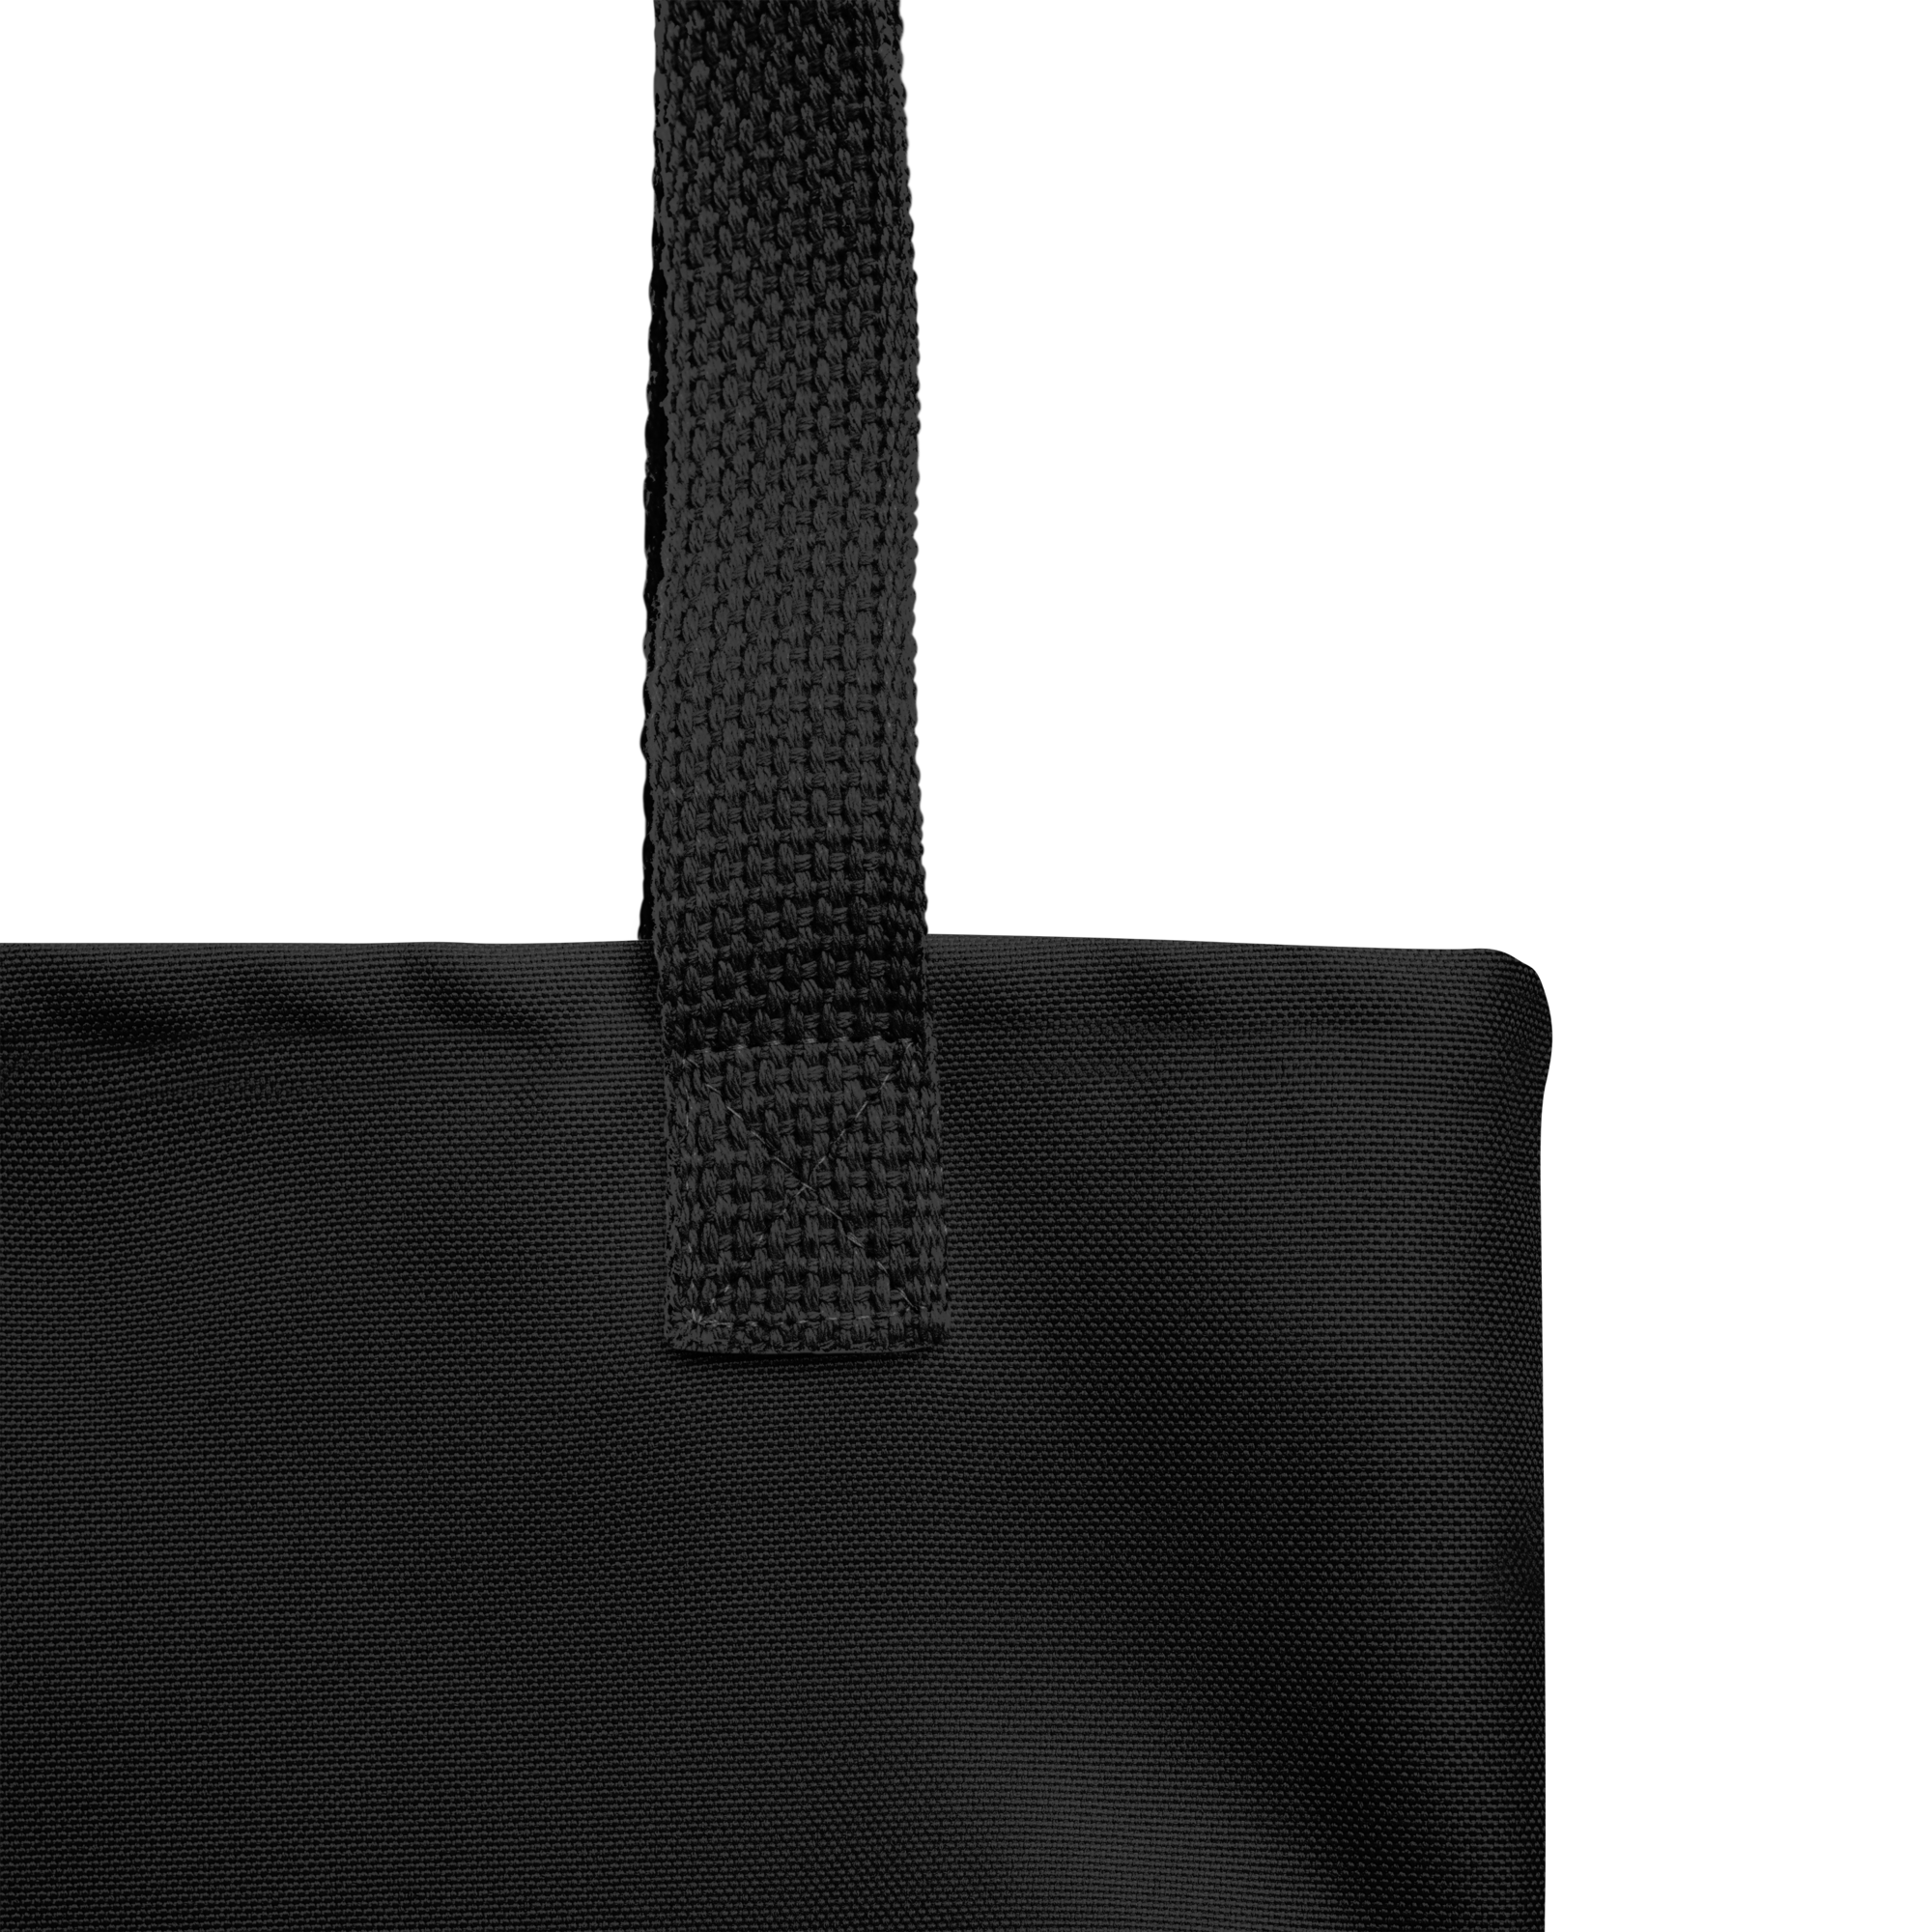 Ivorie Couture Noir Luxury Carry-All Black Tote  Bag strap photo